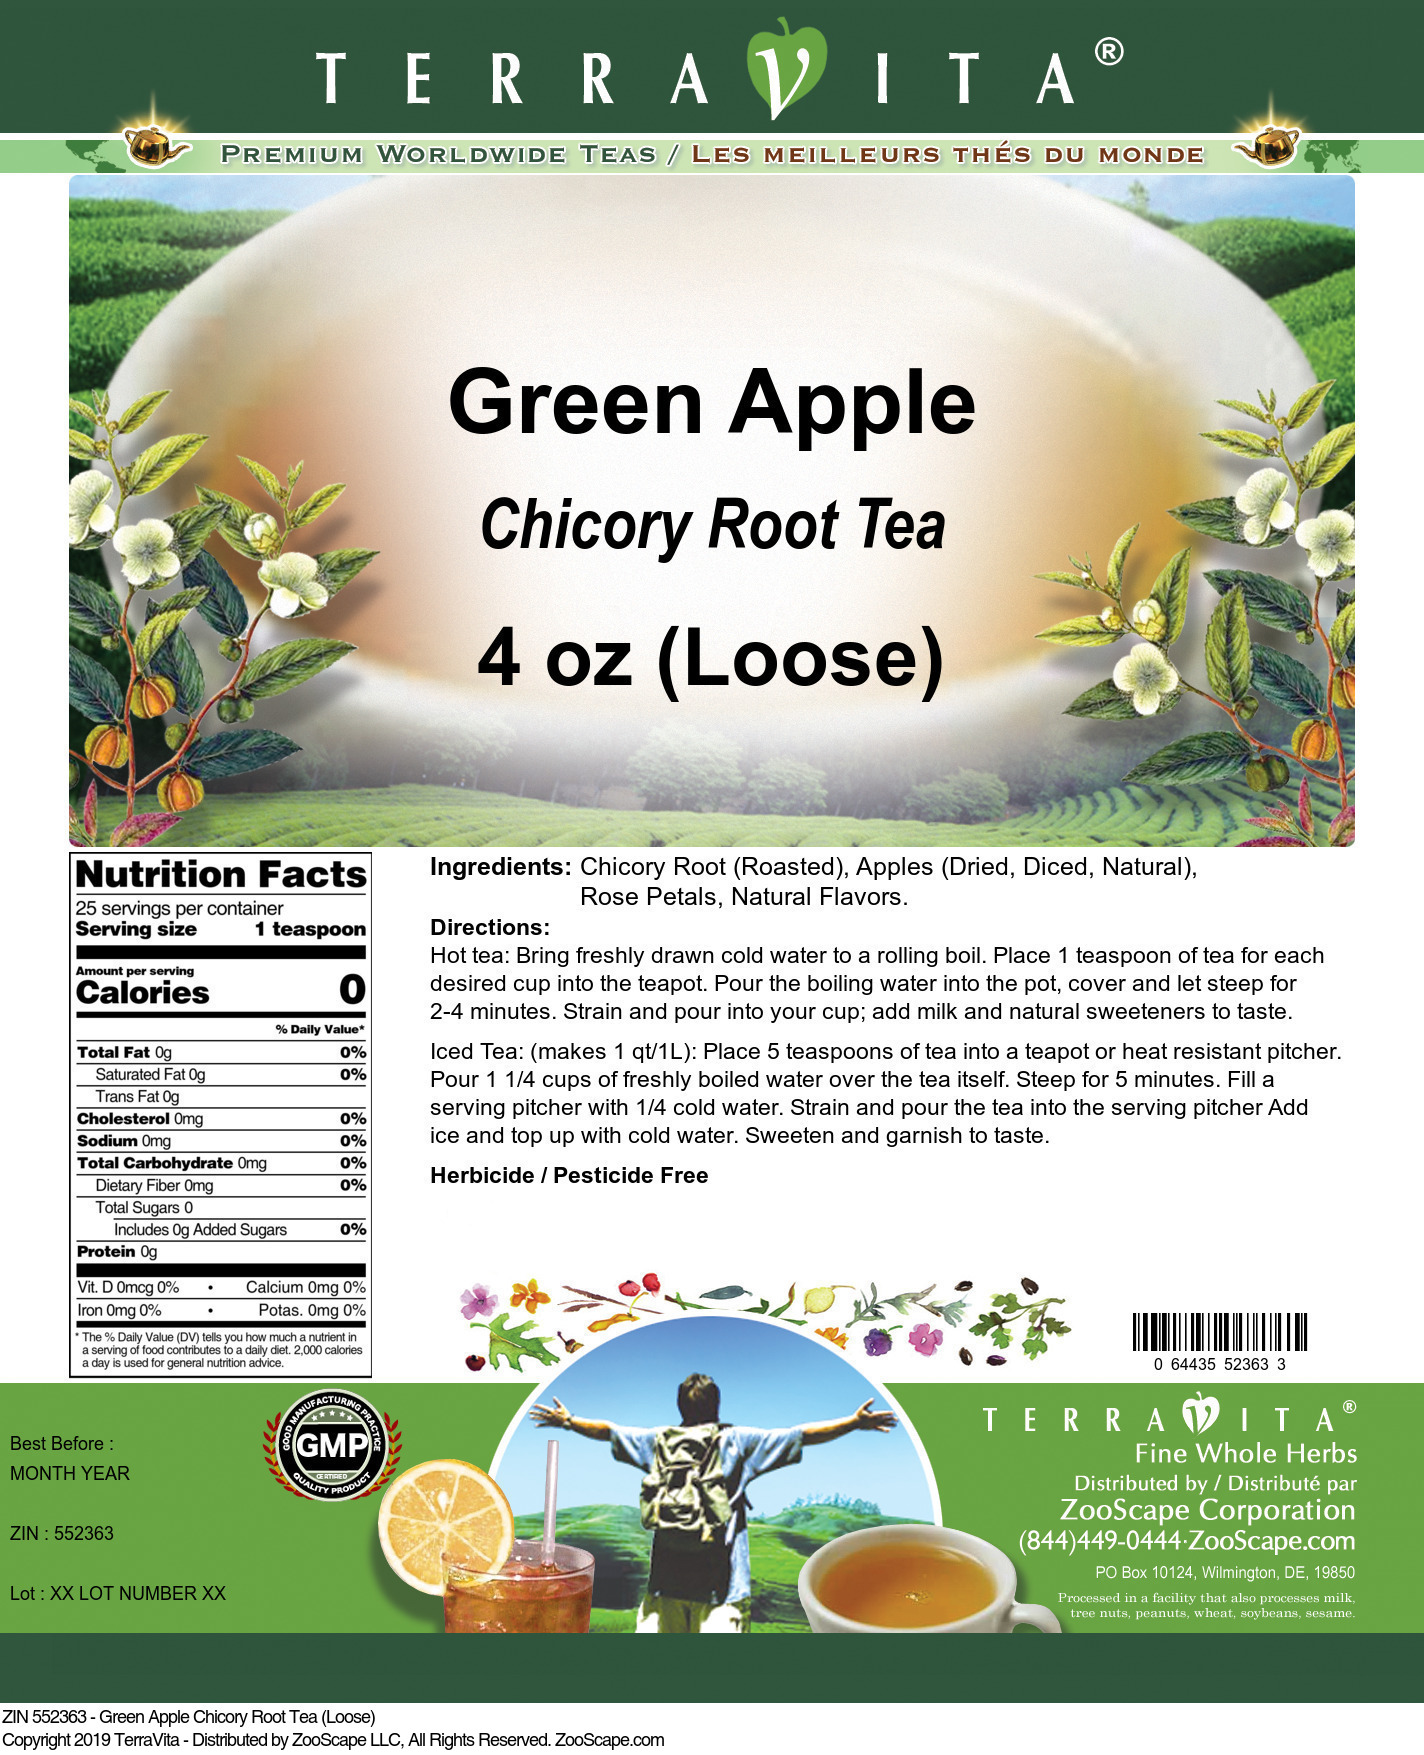 Green Apple Chicory Root Tea (Loose) - Label